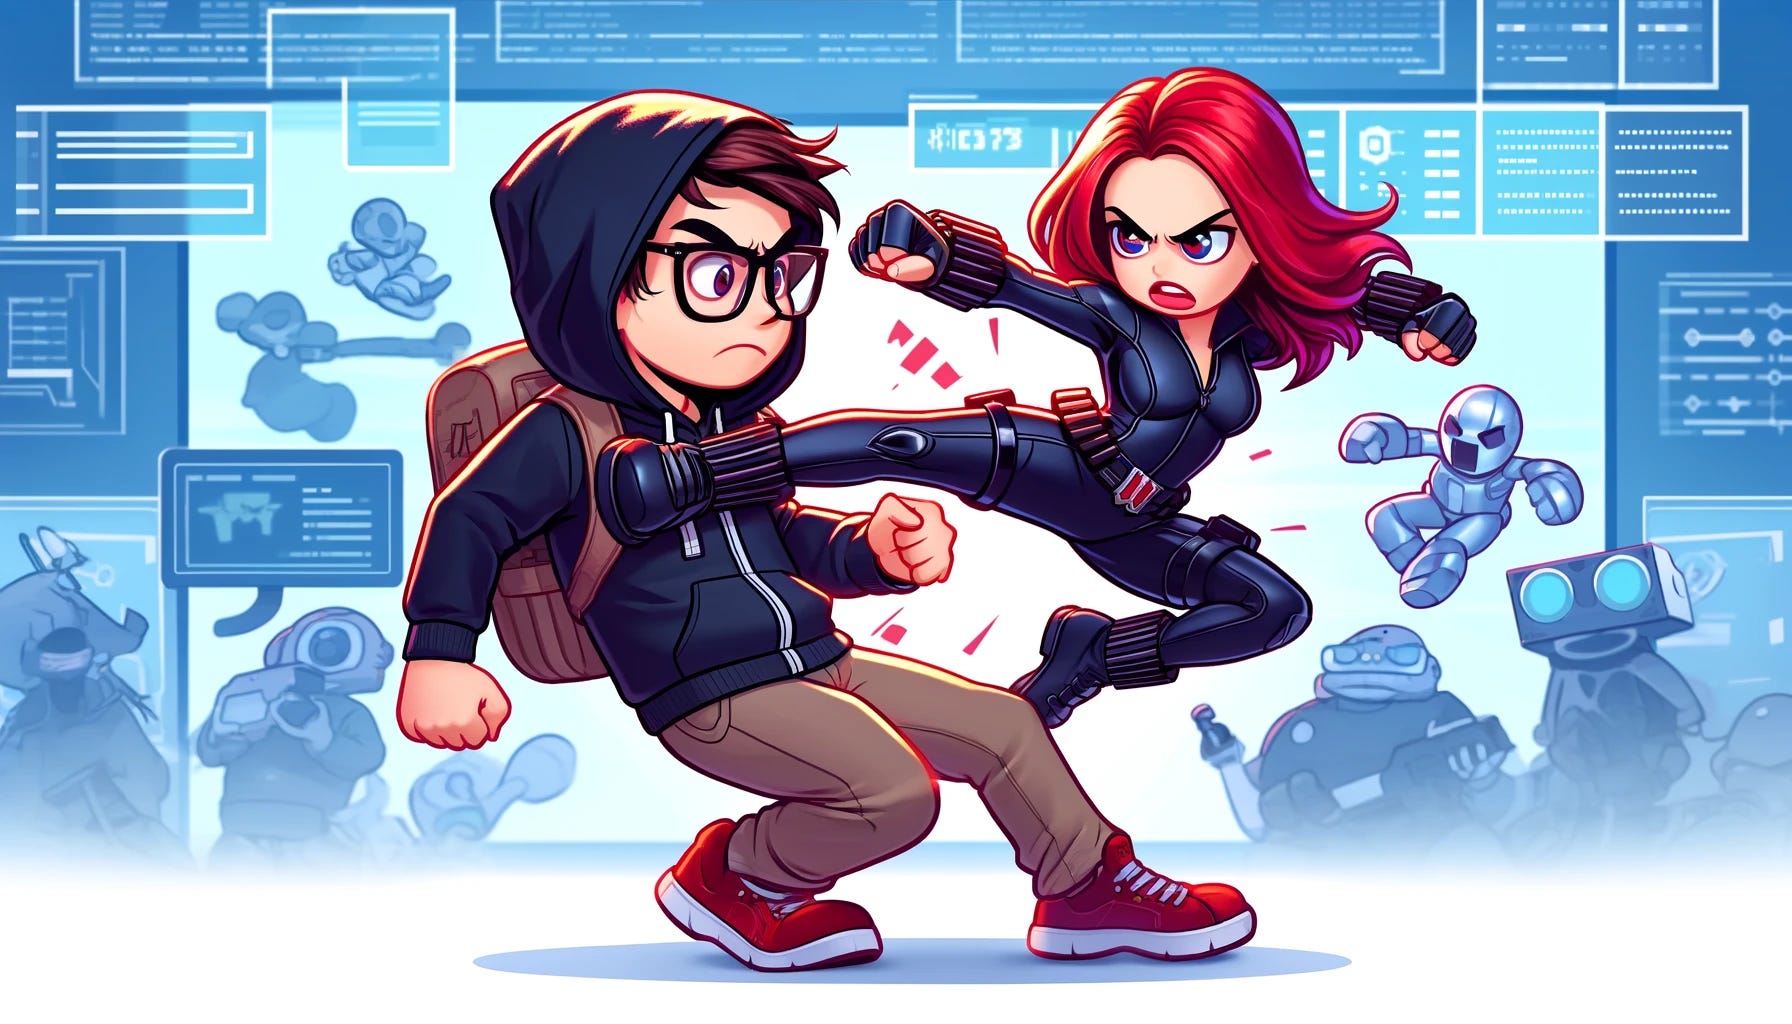 A cartoon illustration featuring Black Widow in a dynamic fight with a Silicon Valley geek. Black Widow should be in her iconic black suit, showcasing her agility and combat skills, while the Silicon Valley geek is depicted without glasses, wearing a hoodie, and holding tech gadgets. They should be engaged in combat, with Black Widow delivering a kick or punch and the geek countering with a gadget. The background should be a tech-themed environment, filled with futuristic devices and code screens. The scene should be action-packed, with vibrant colors and exaggerated expressions to emphasize the cartoon style.